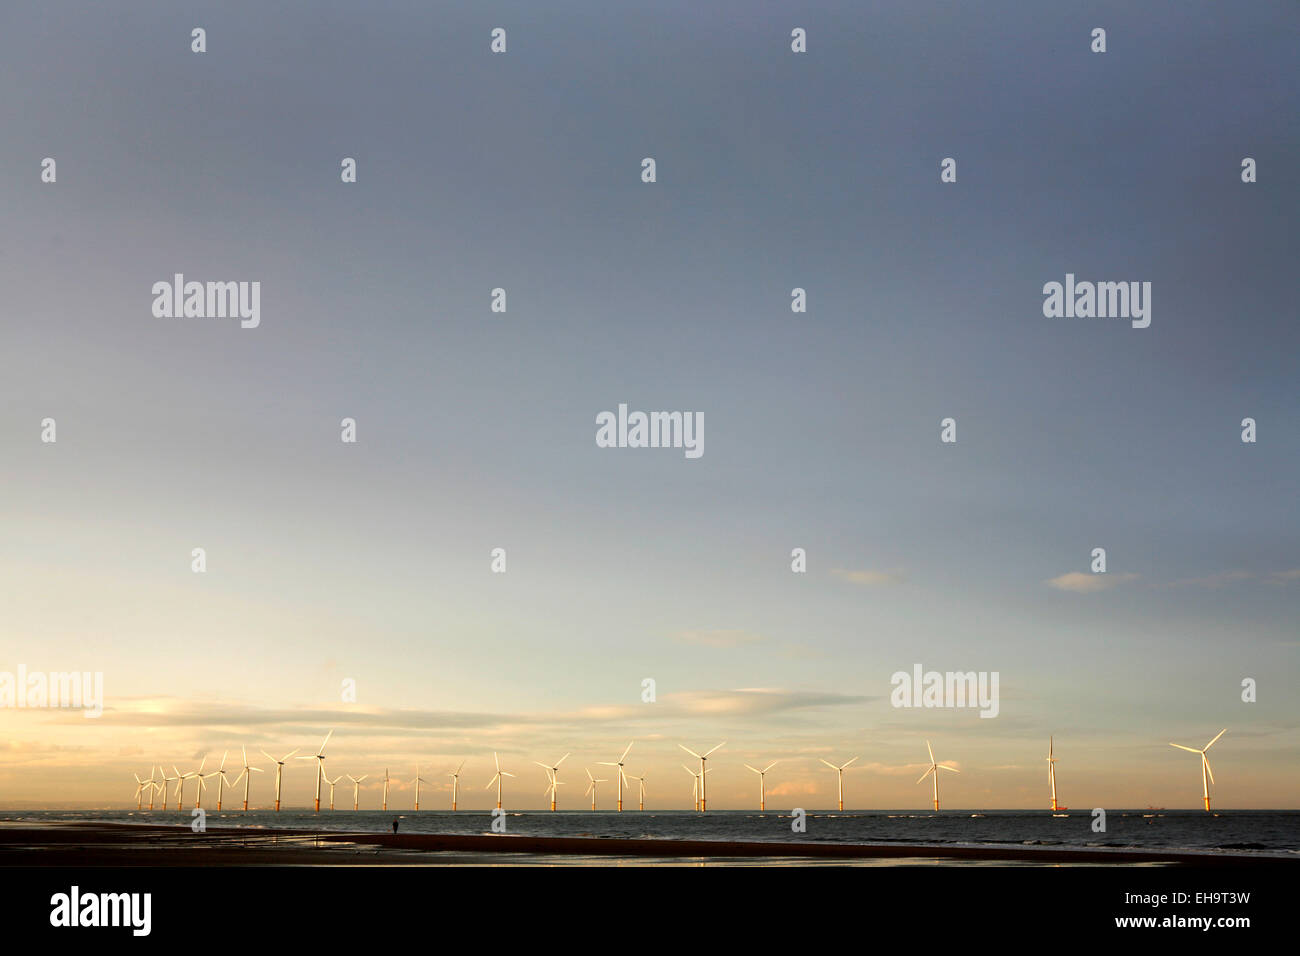 Wind turbines in the North Sea near the town of Redcar, Teeside, UK. Stock Photo